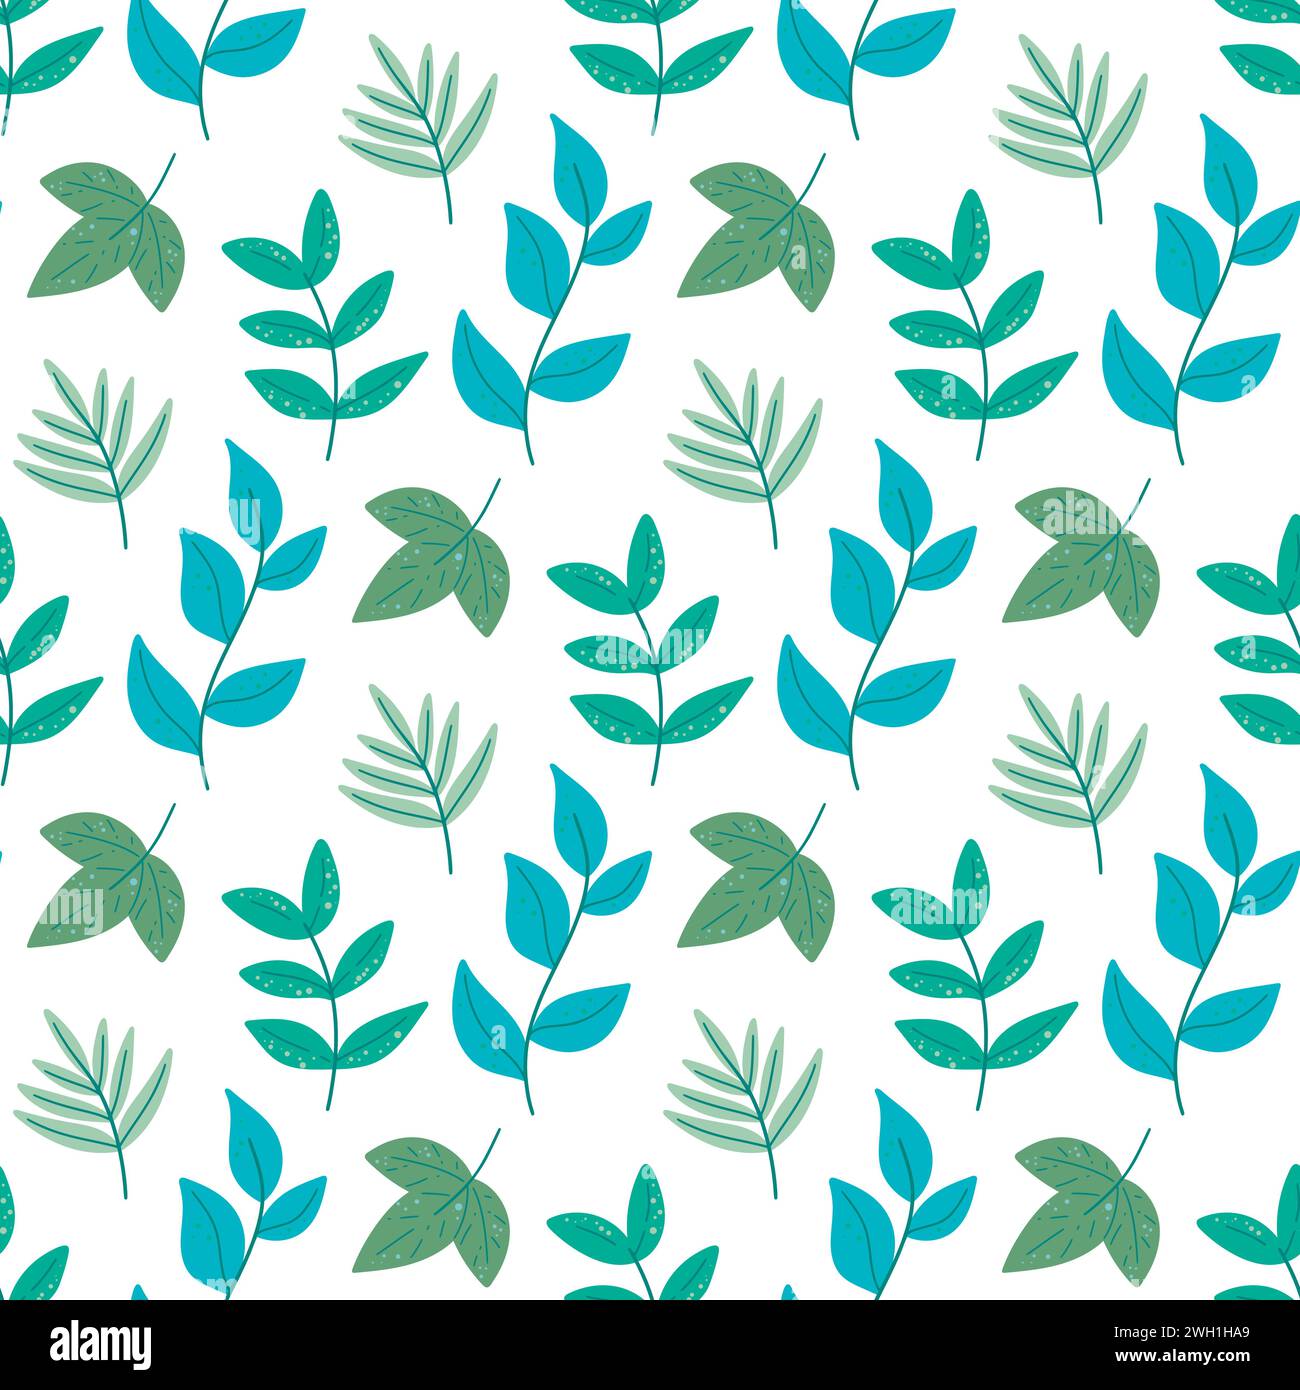 Spring greenery seamless pattern, vector graphics. Summer foliage background. Sheet, twigs and leaves print for textiles, packaging, paper and design. Stock Vector